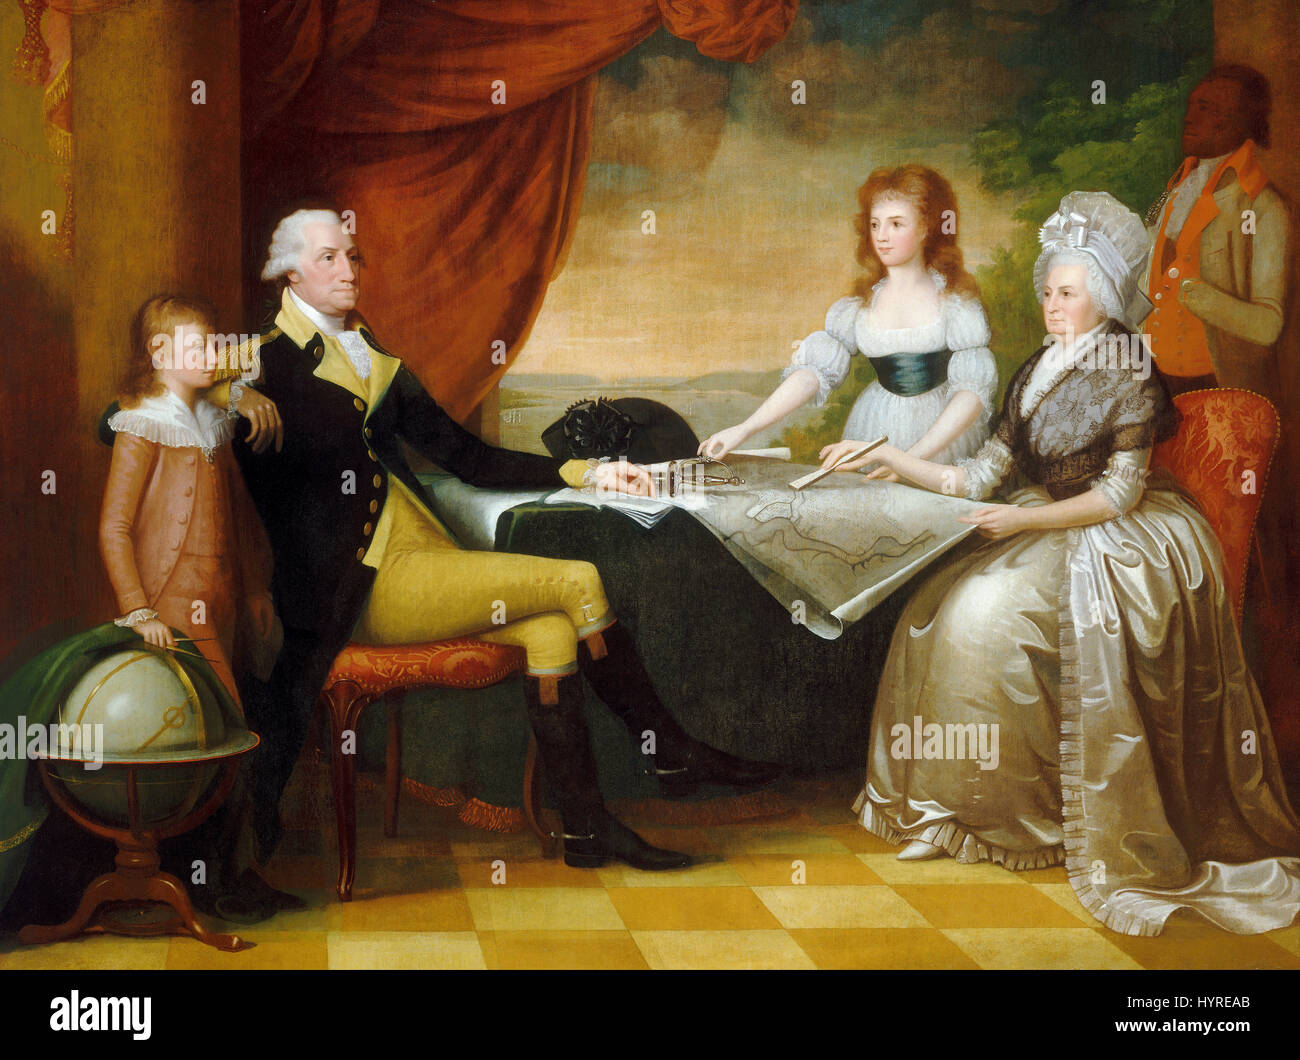 The Washington Family by Edward Savage, left to right: George Washington Parke Custis, George Washington, Eleanor Parke Custis, Martha Washington, and an enslaved servant, probably William Lee or Christopher Sheels. Stock Photo